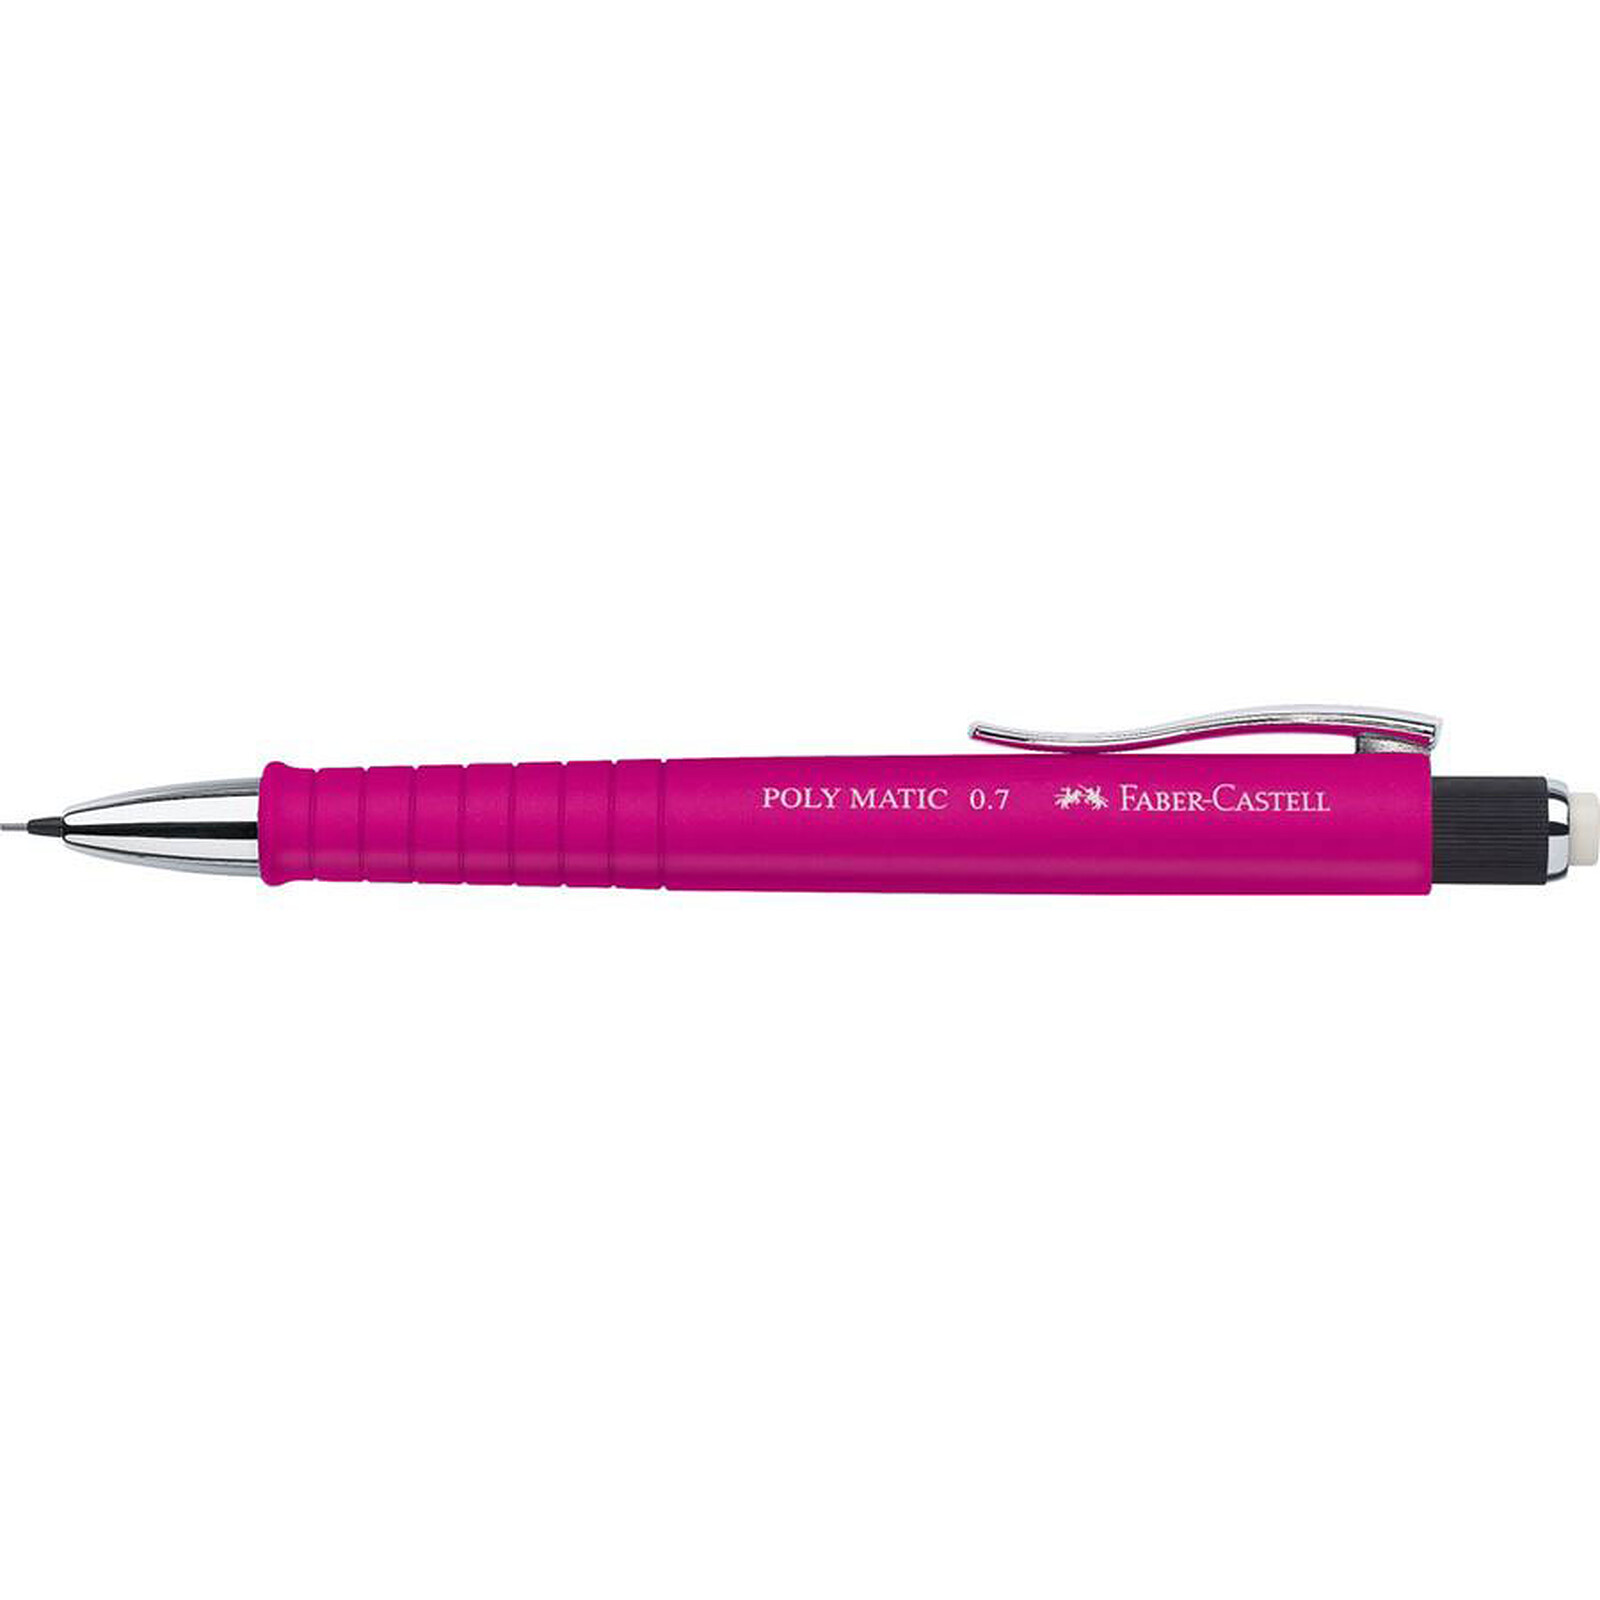 Porte-mine POLY MATIC FABER-CASTELL - 0.7 mm HB - rose